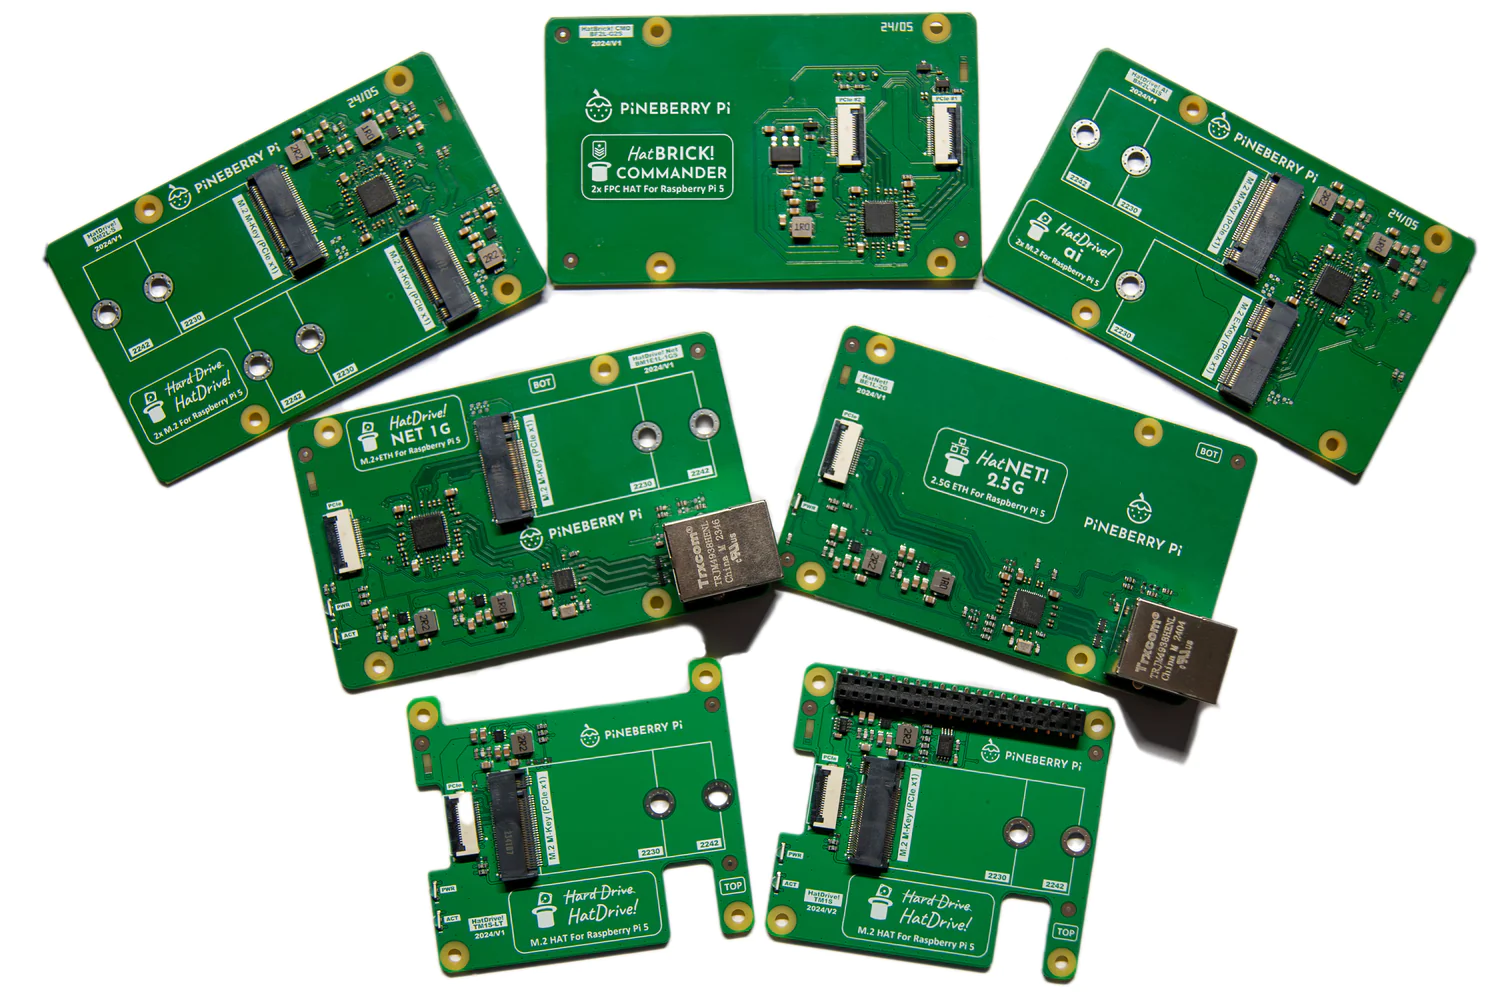 Pineberry Pi Launches New Range of Expansion Boards for Raspberry Pi 5 with Enhanced AI, Storage, and Networking Capabilities